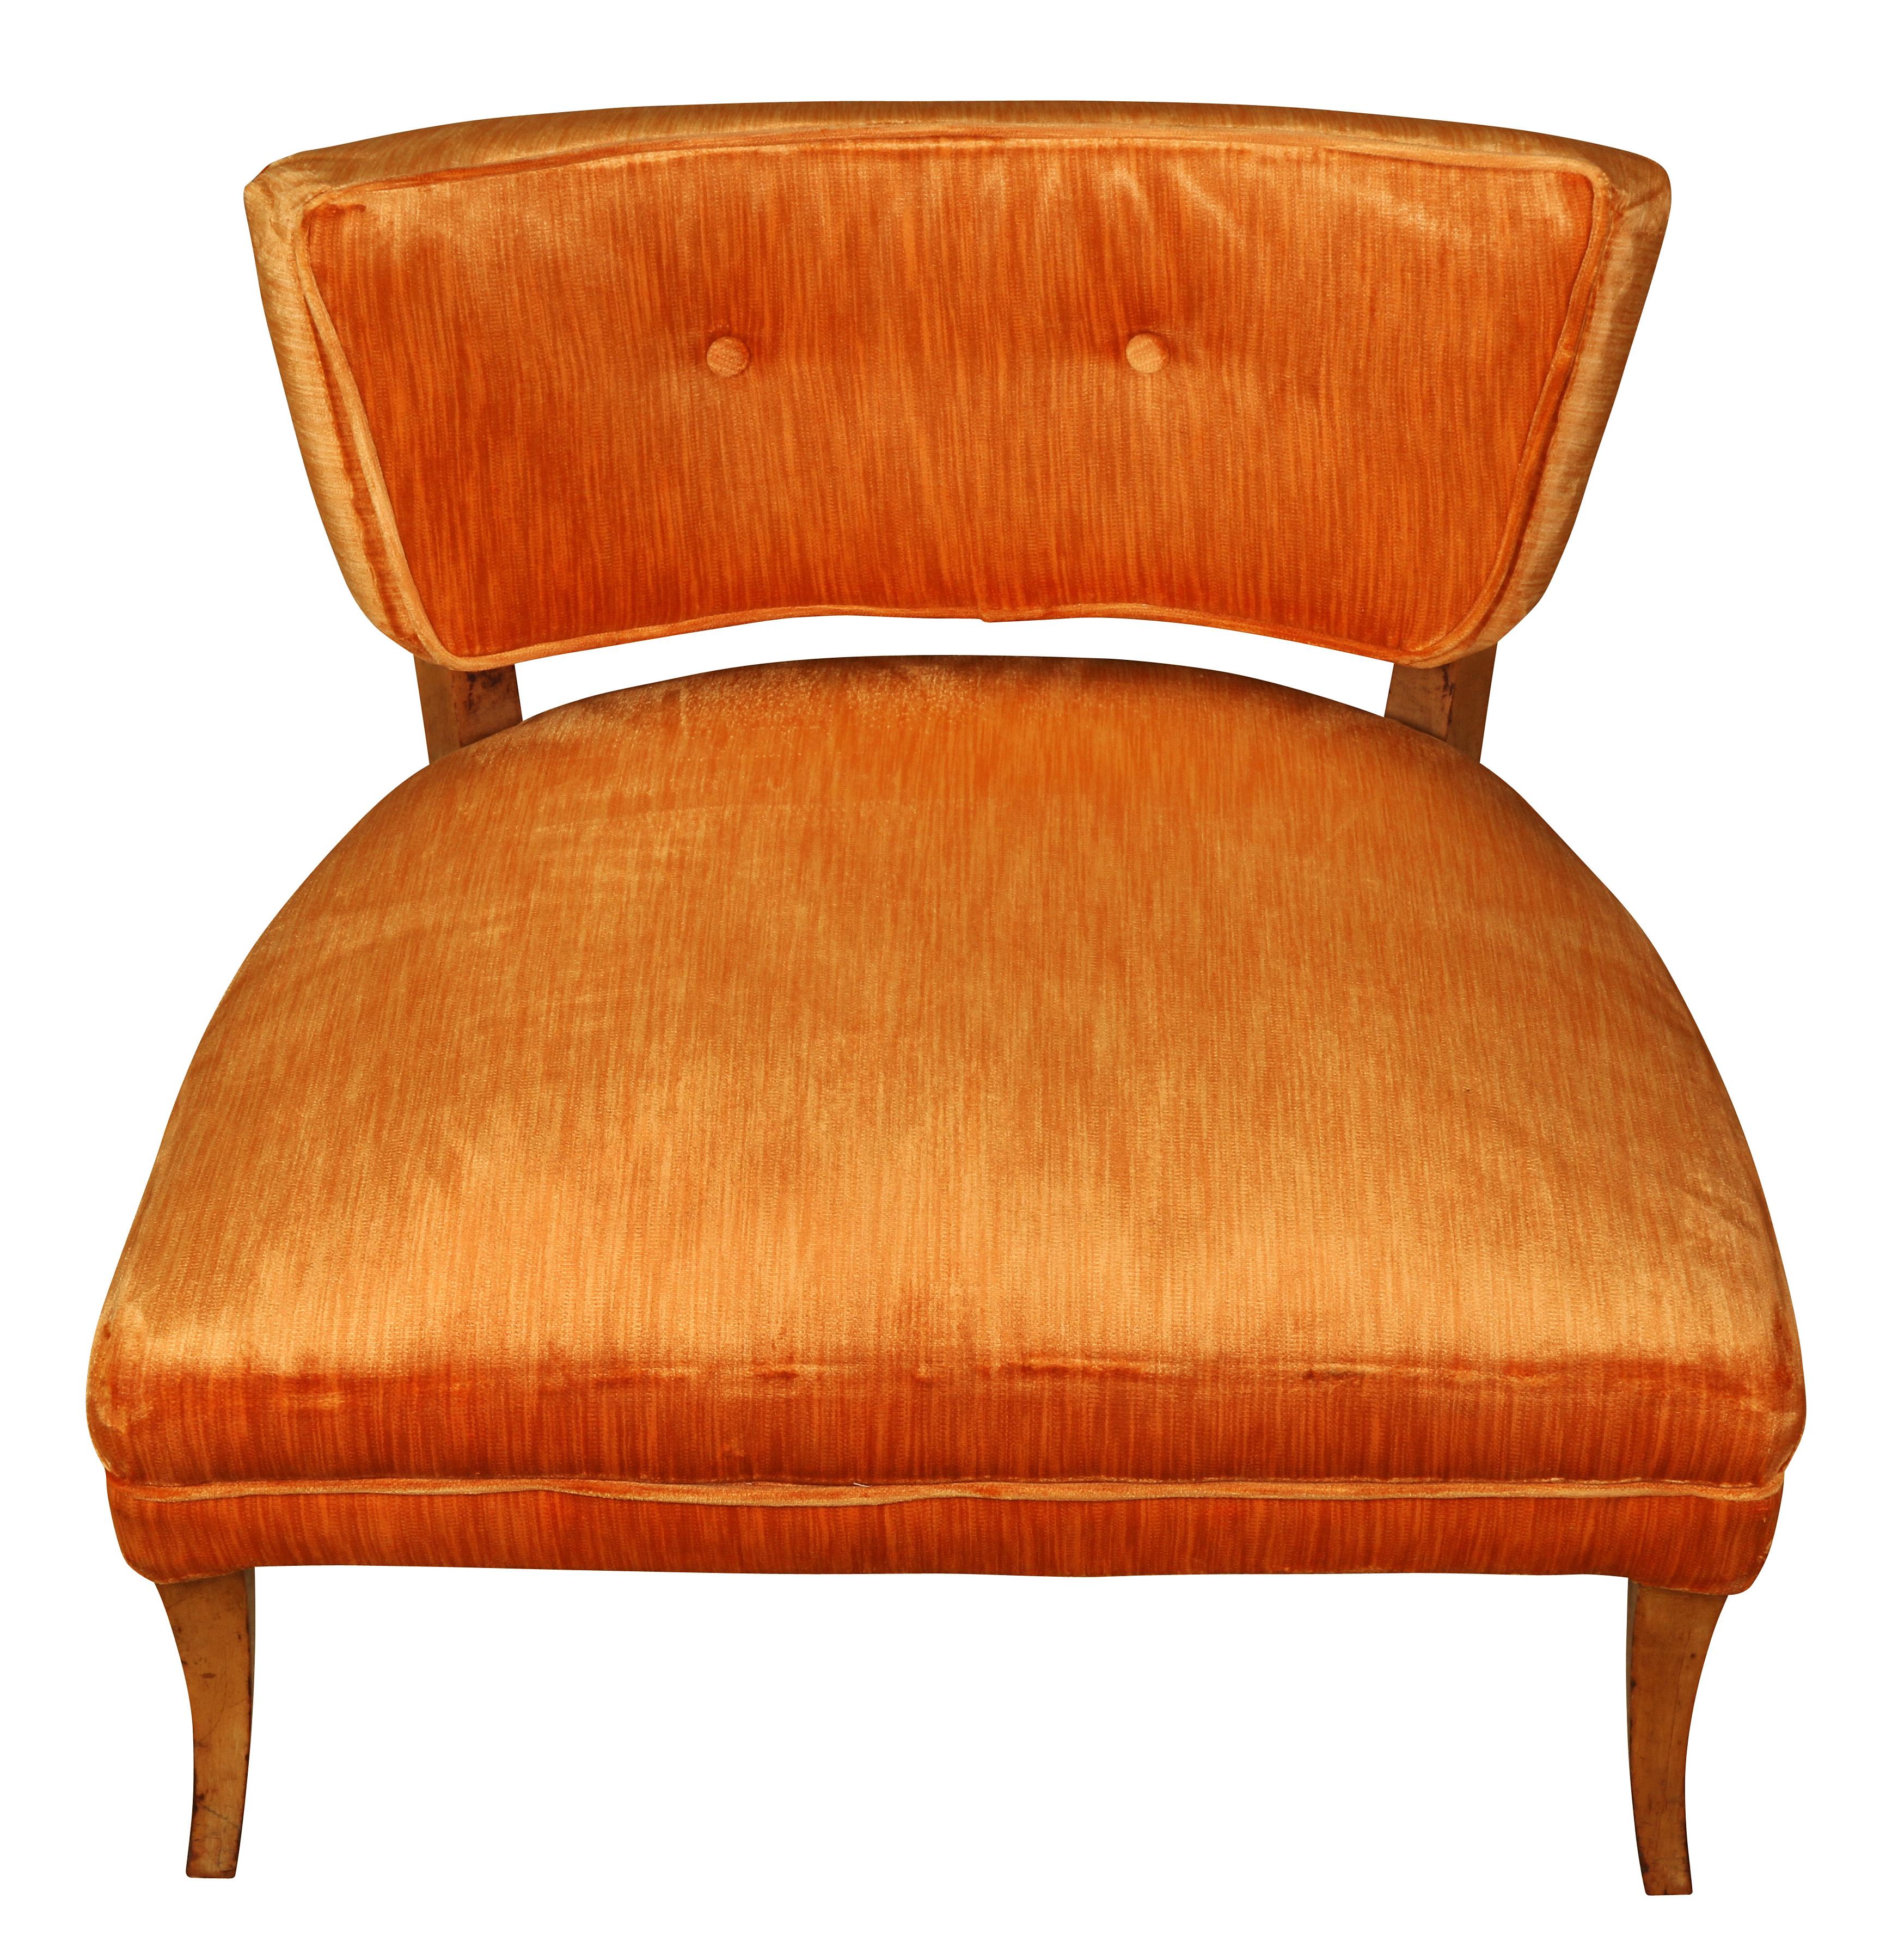 Attributed to Hollywood designer Billy Haines, this pair of low slipper chairs ooze with style and glamour. With a tufted back, wide low seat and slightly splayed legs, the chairs are comfortable as well as versatile and can be easily added to any